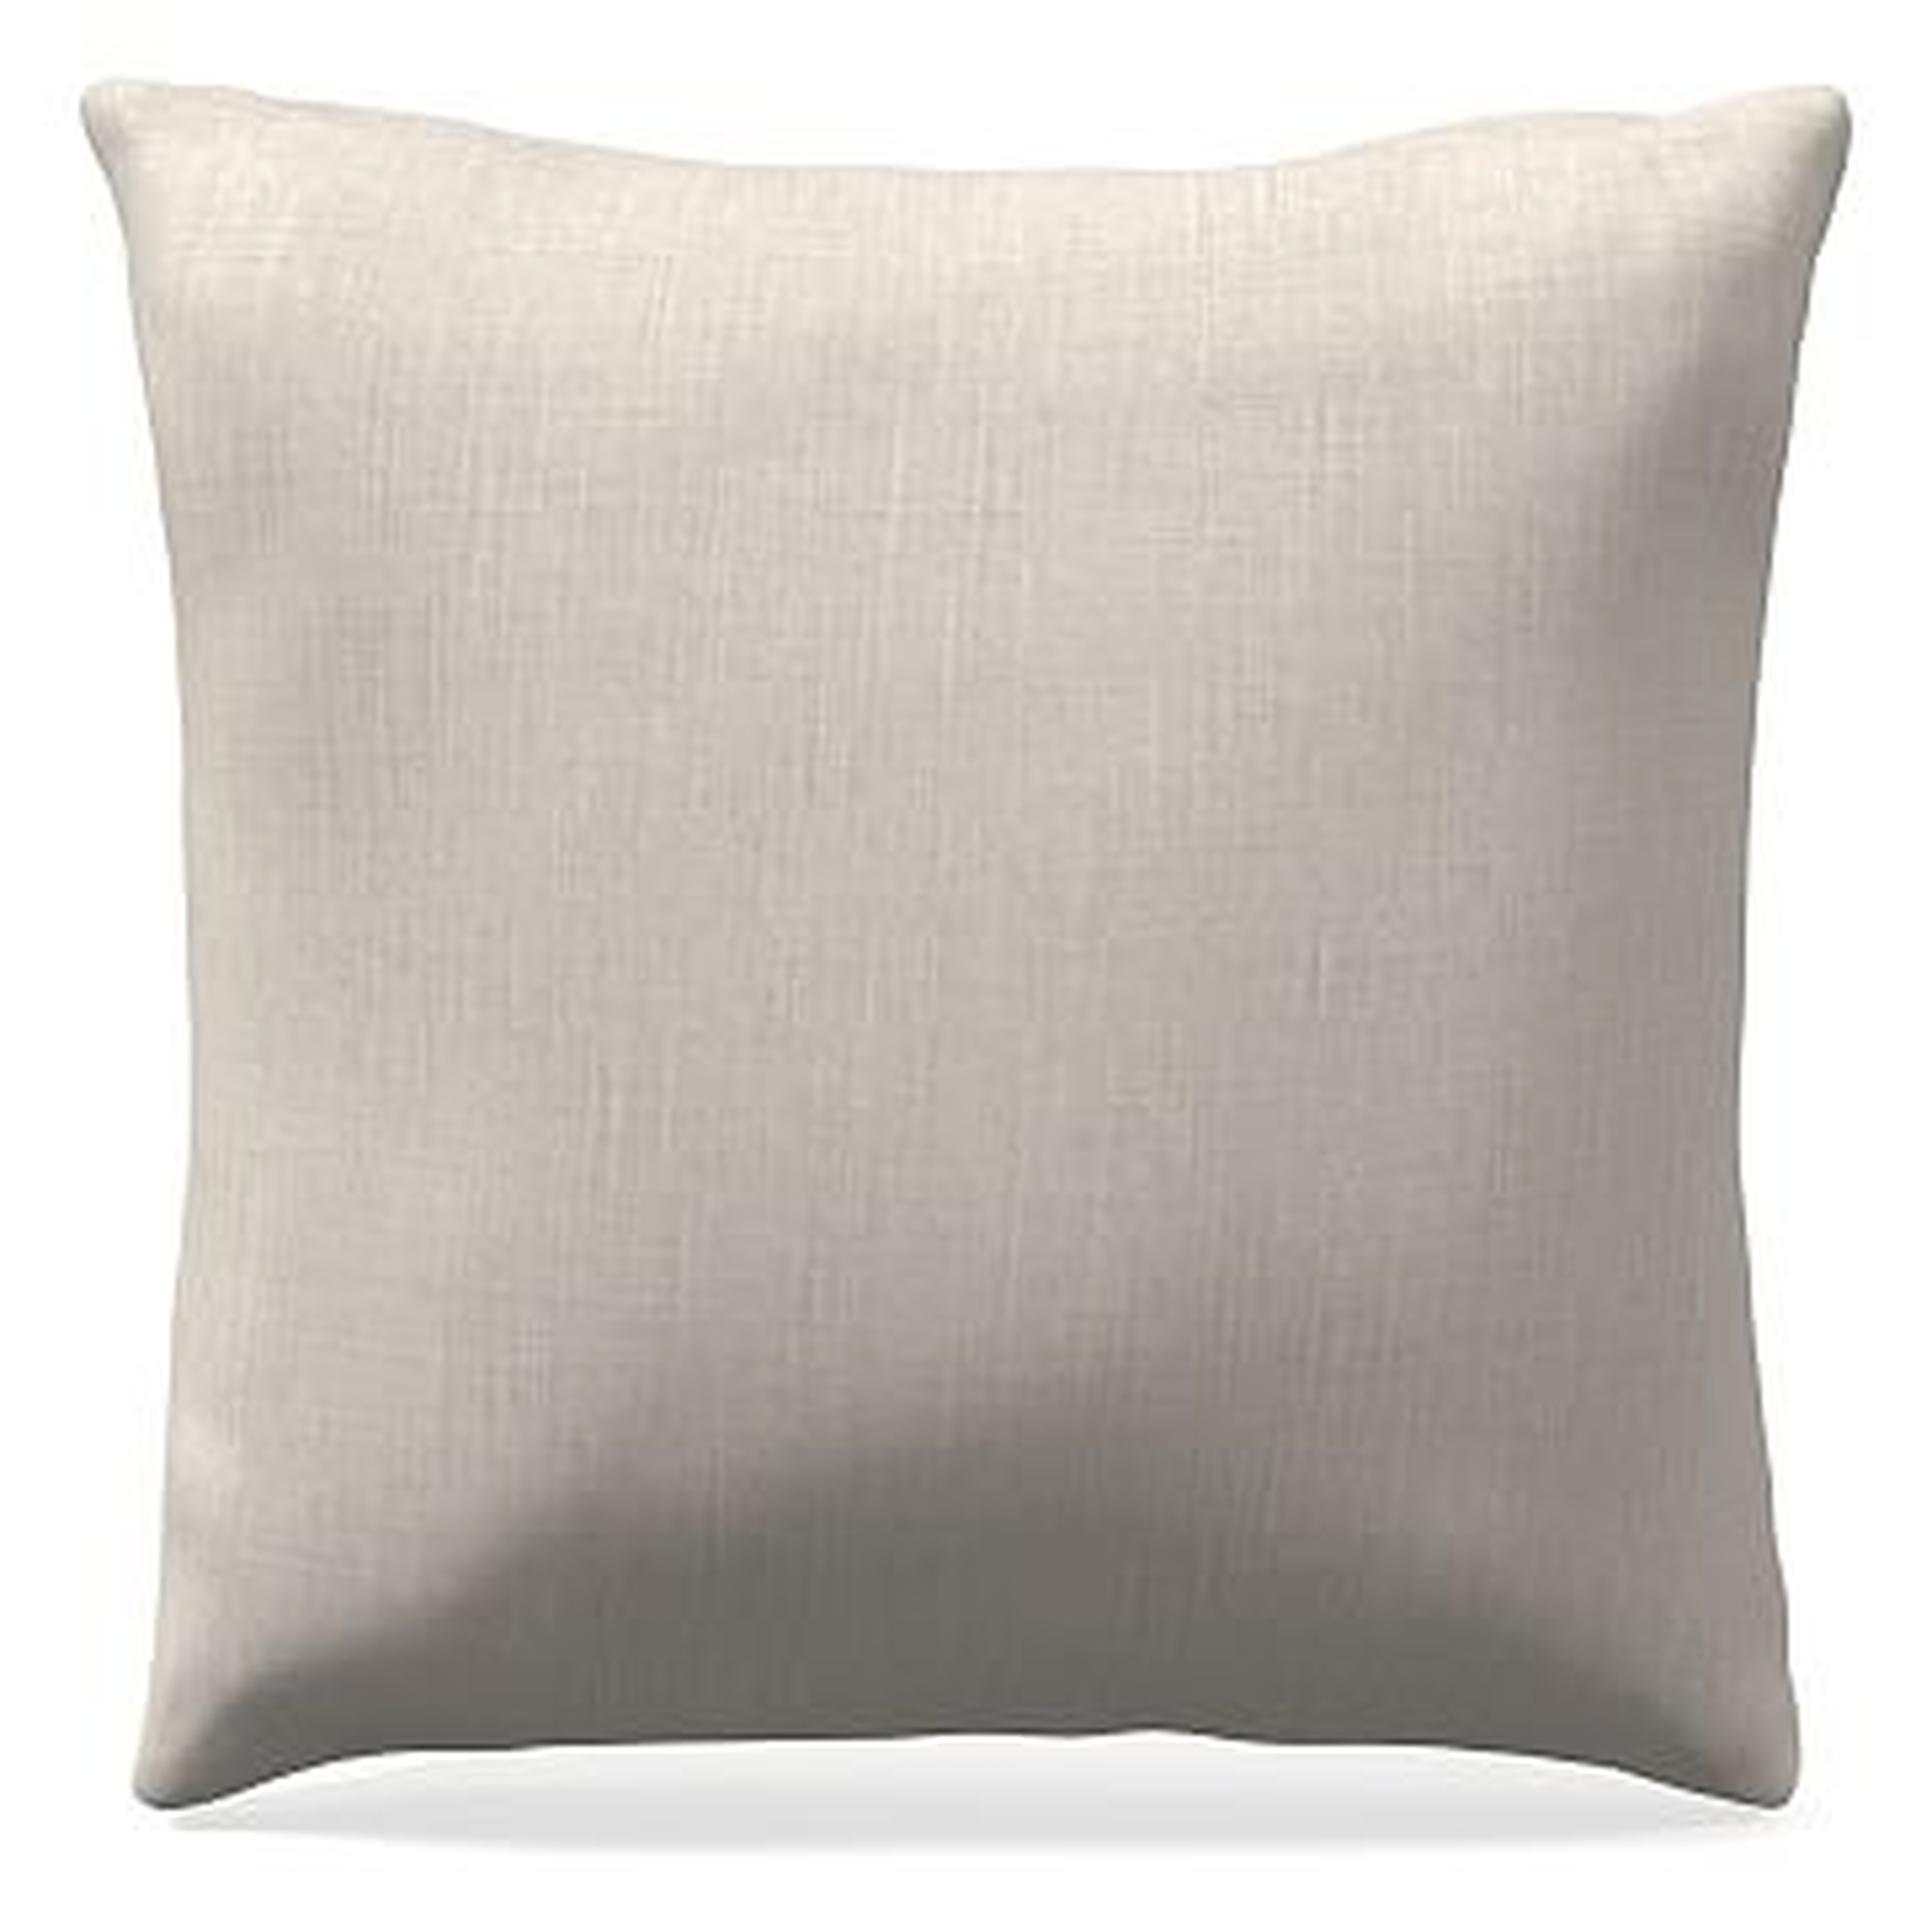 24"x 24" Pillow, N/A, Performance Yarn Dyed Linen Weave, Alabaster, N/A - West Elm